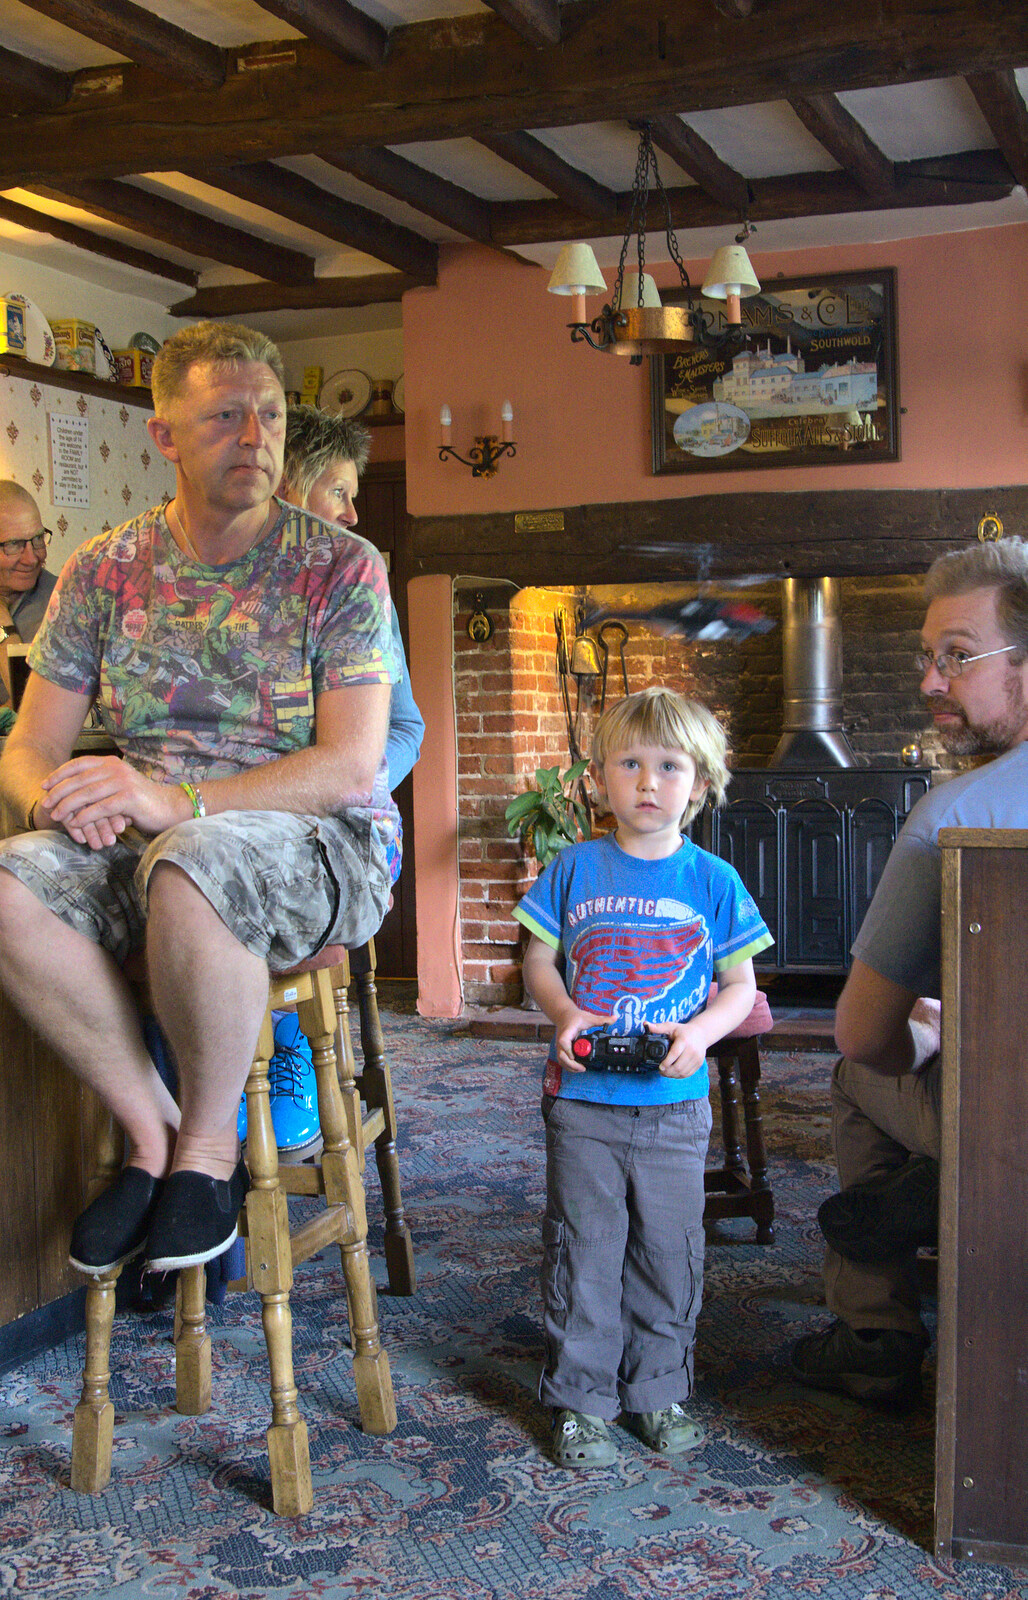 Oak flies a toy helicopter from Matthew's Birthday up The Swan Inn, Brome, Suffolk - 17th August 2014